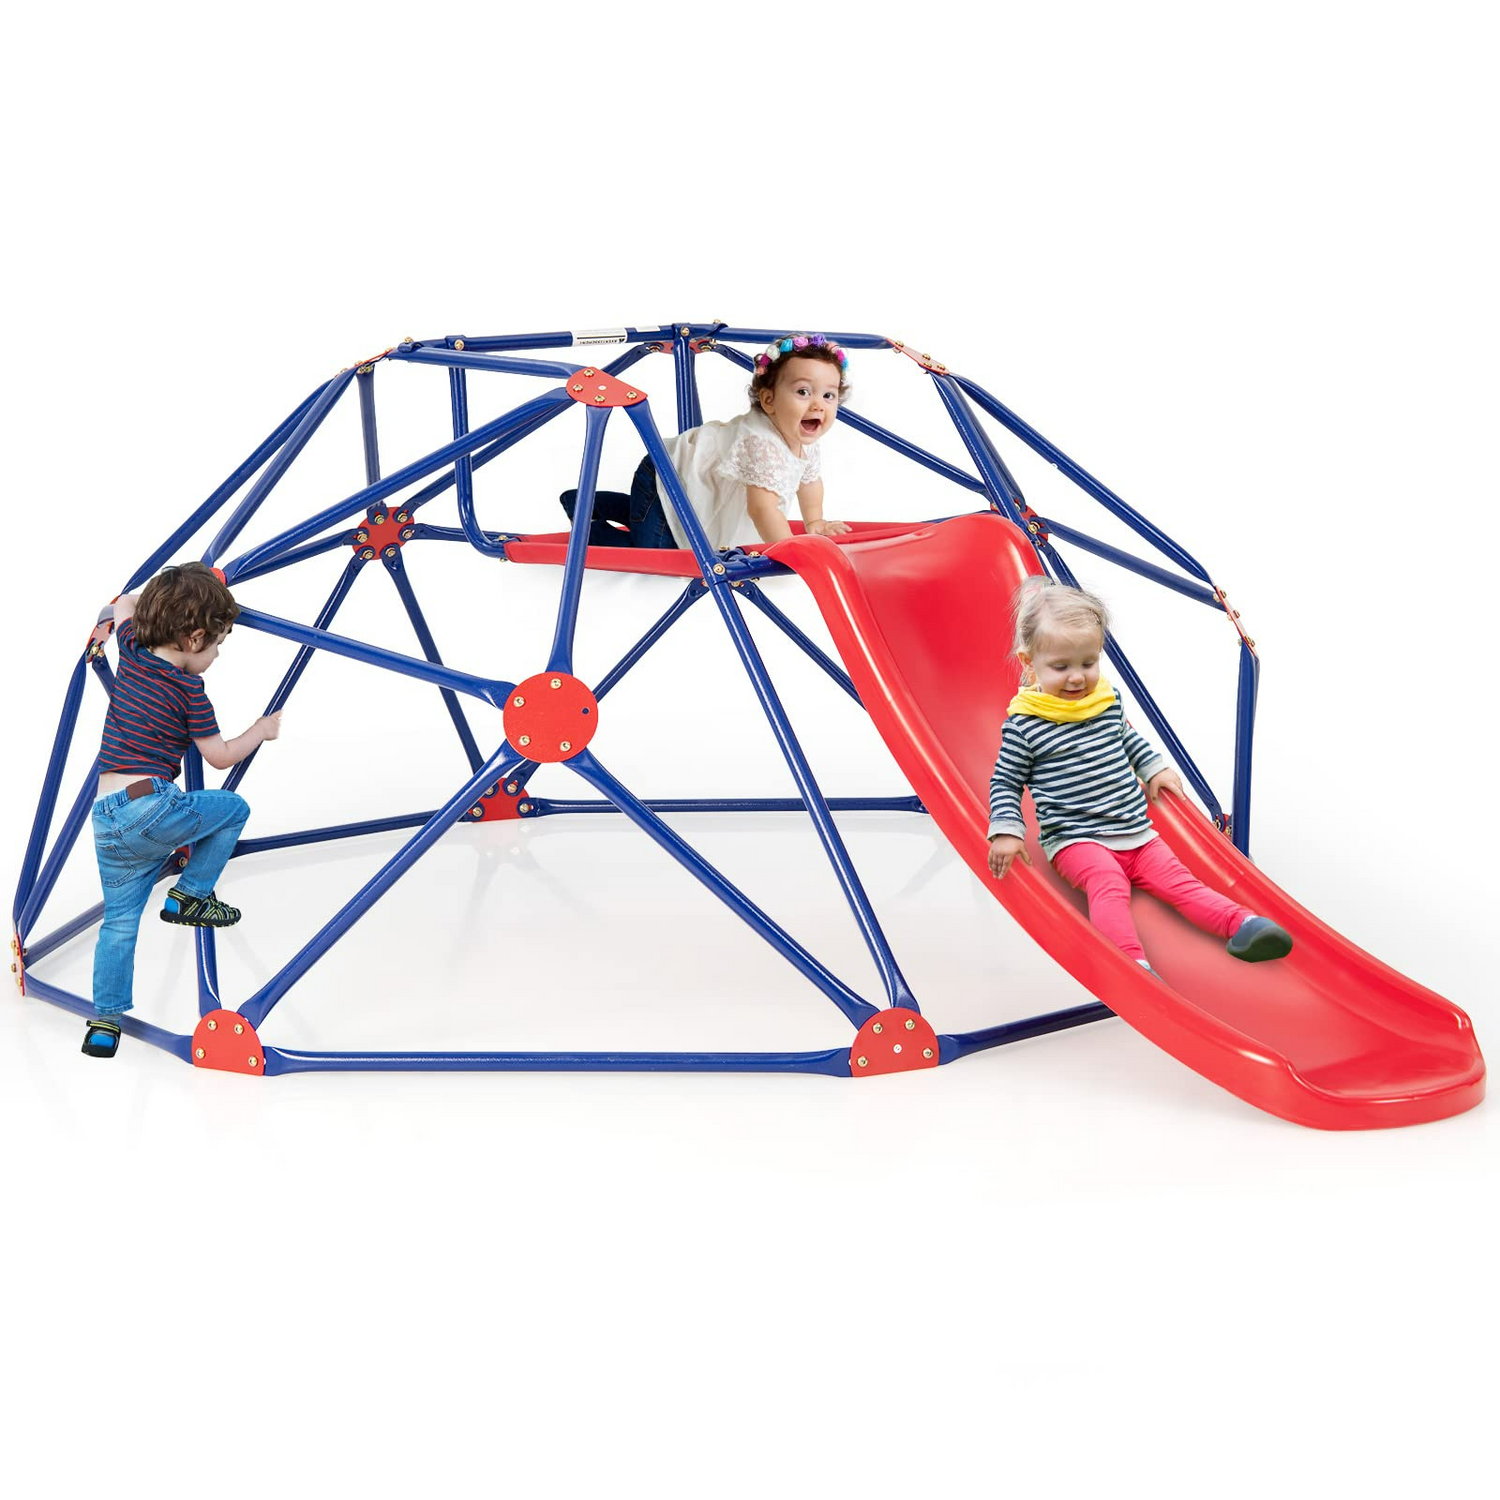 OLAKIDS Climbing Dome, Kids Outdoor Jungle Gym Geodesic Climber Toy with Slide, Steel Frame, Playground Backyard Climb Structure Play Center Equipment OLAKIDS